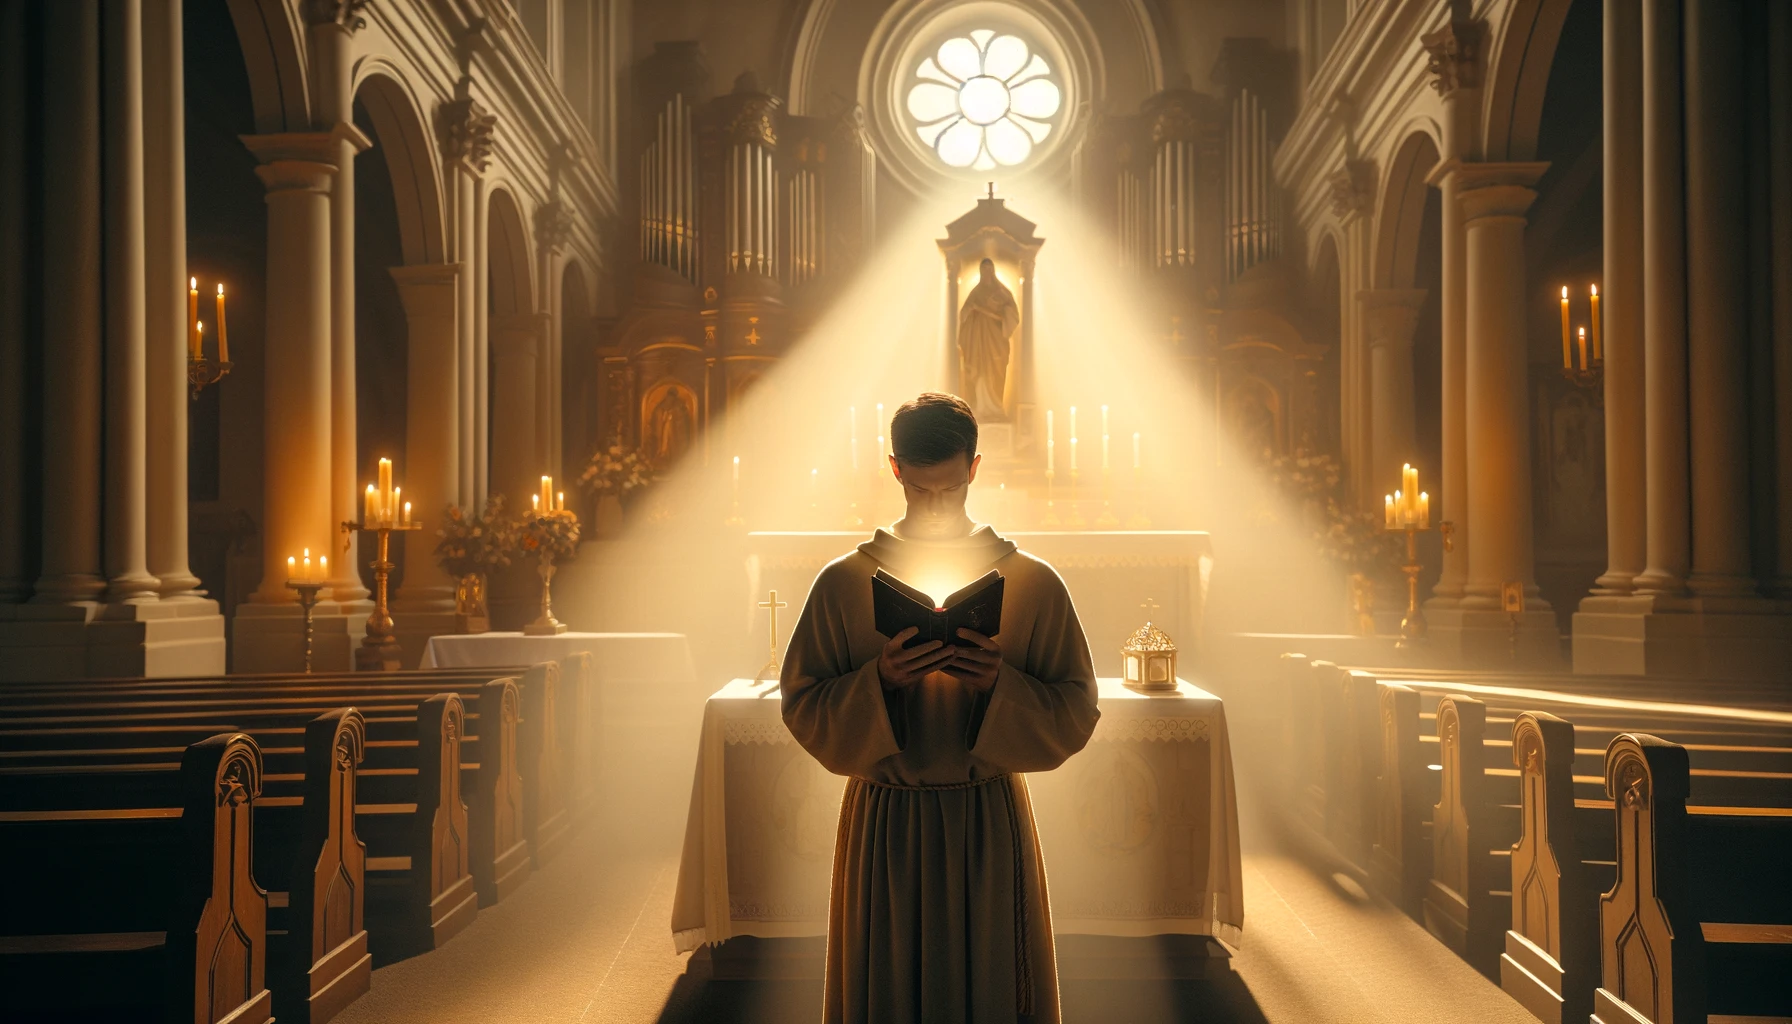 What Prayer Do You Have To Recite In Confession?